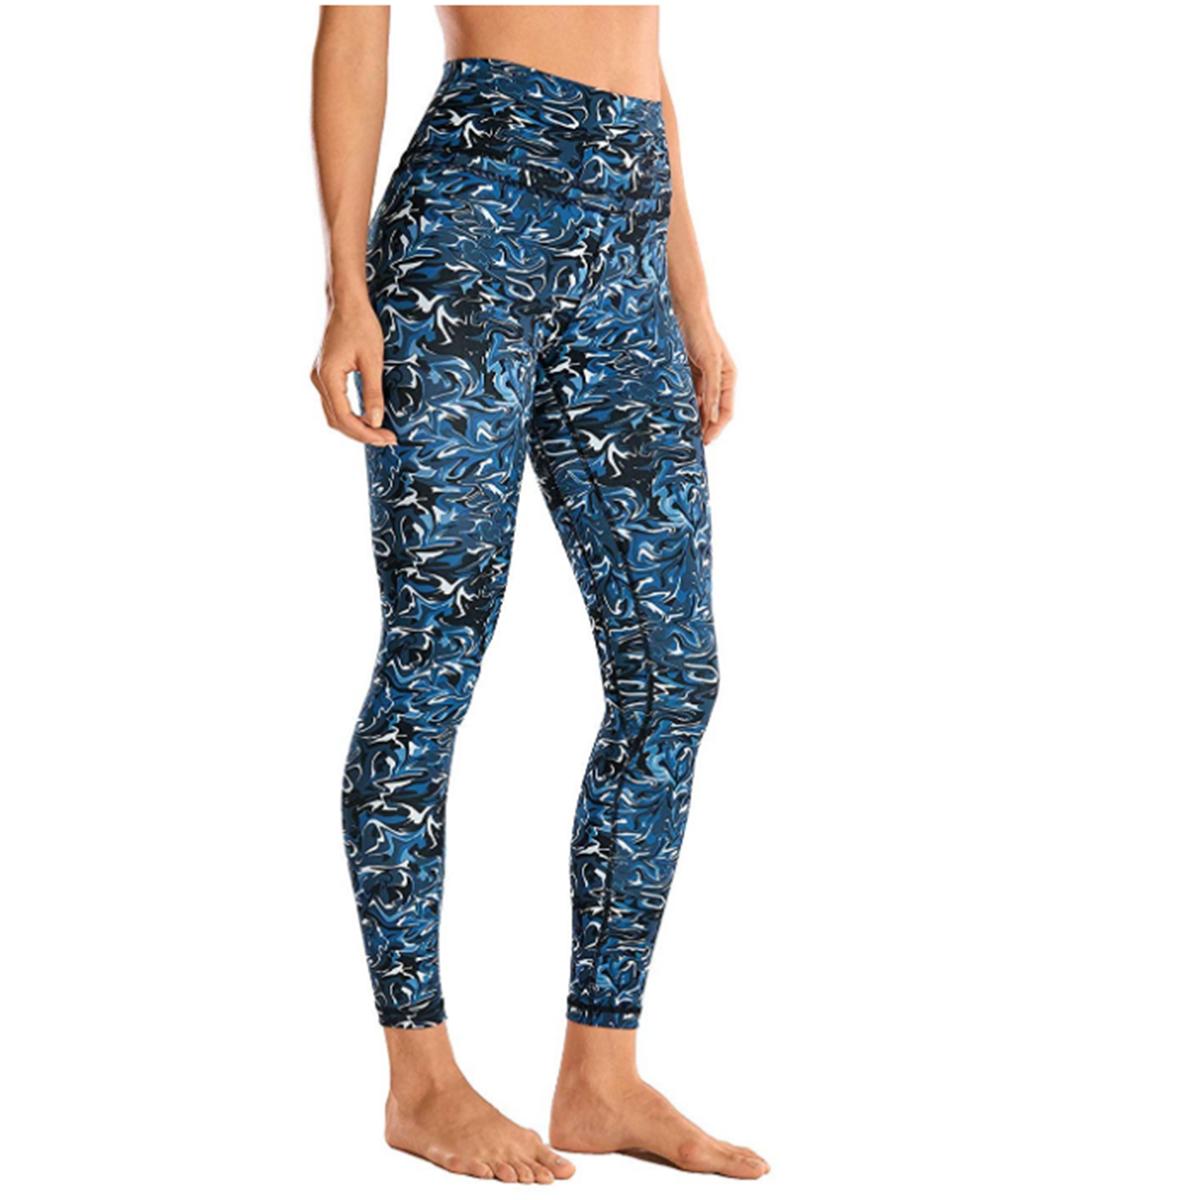 Lululemon $24 Dupe Leggings Are As Amazing as the Real Thing